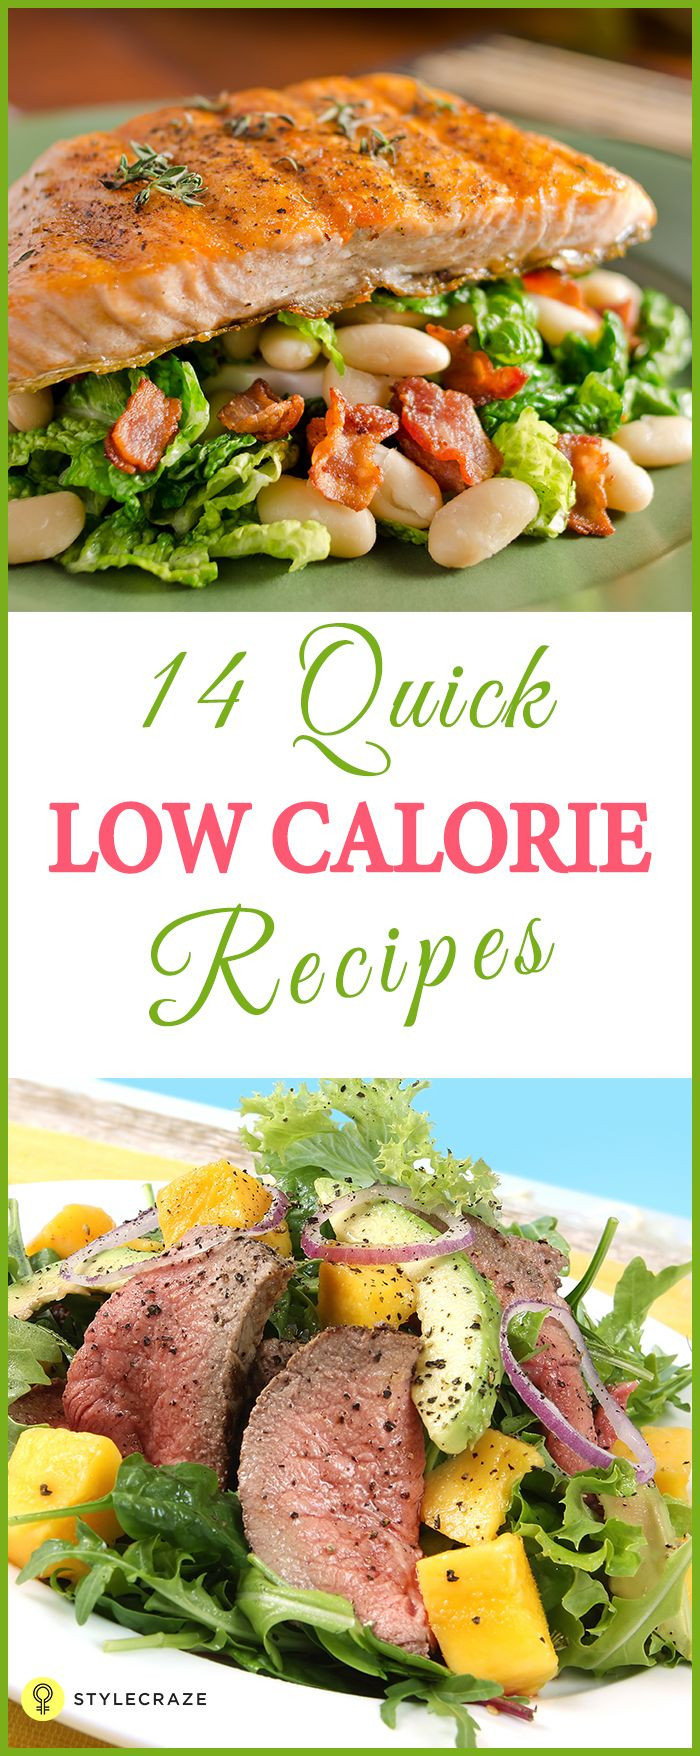 Easy Low Calorie Dinners
 The 20 Best Ideas for Quick Low Calorie Dinners Best